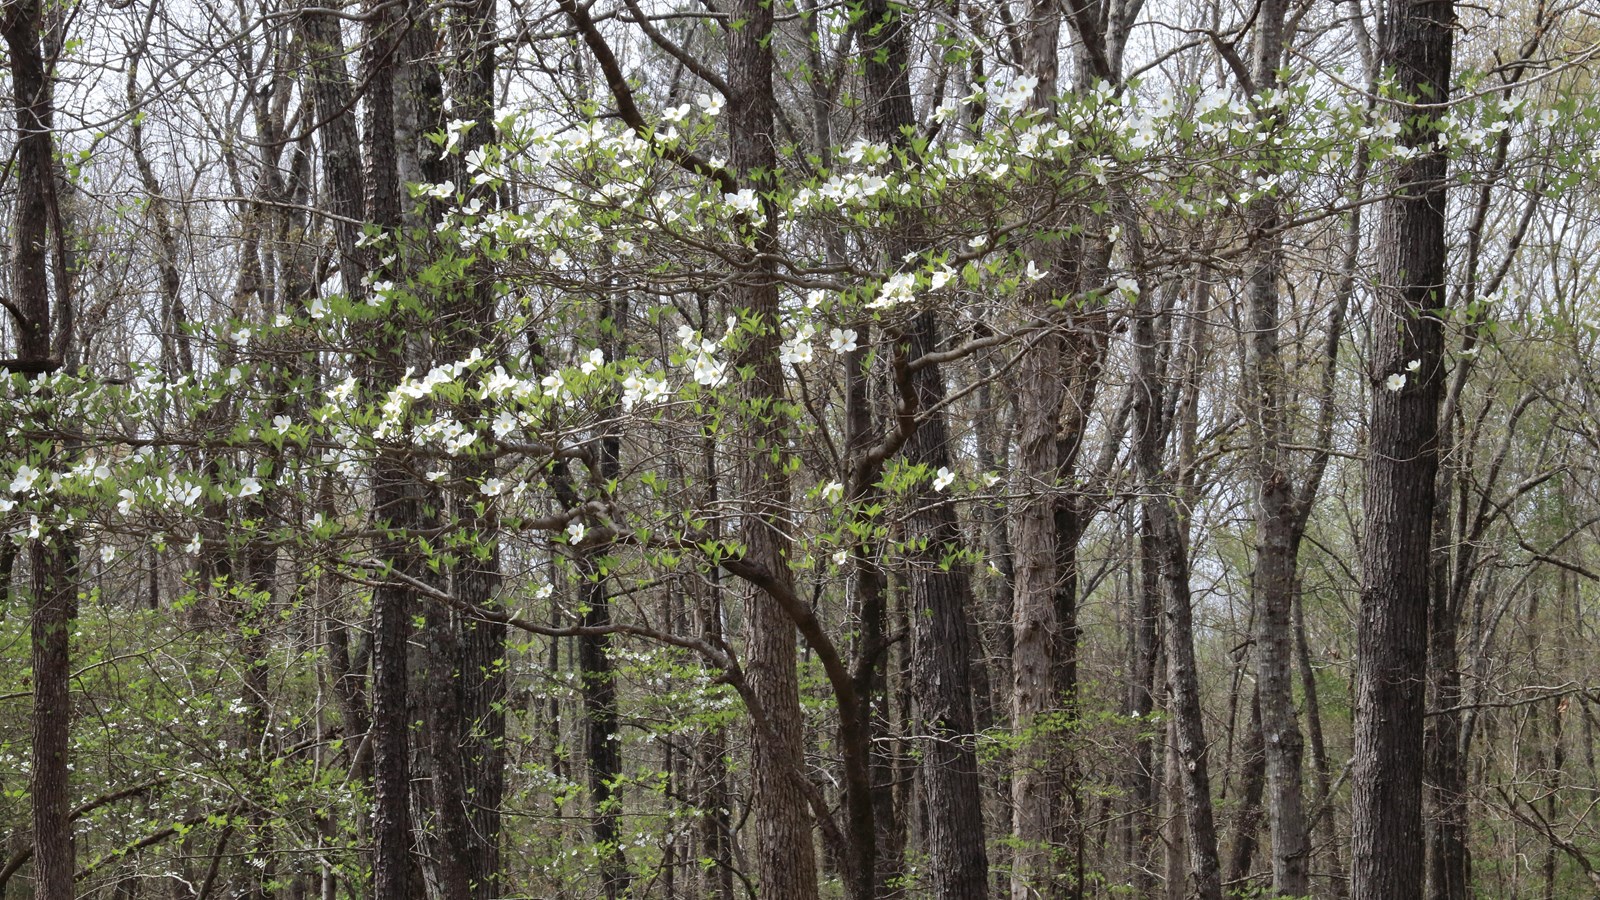 A hardwood forest with white dogwood blooms